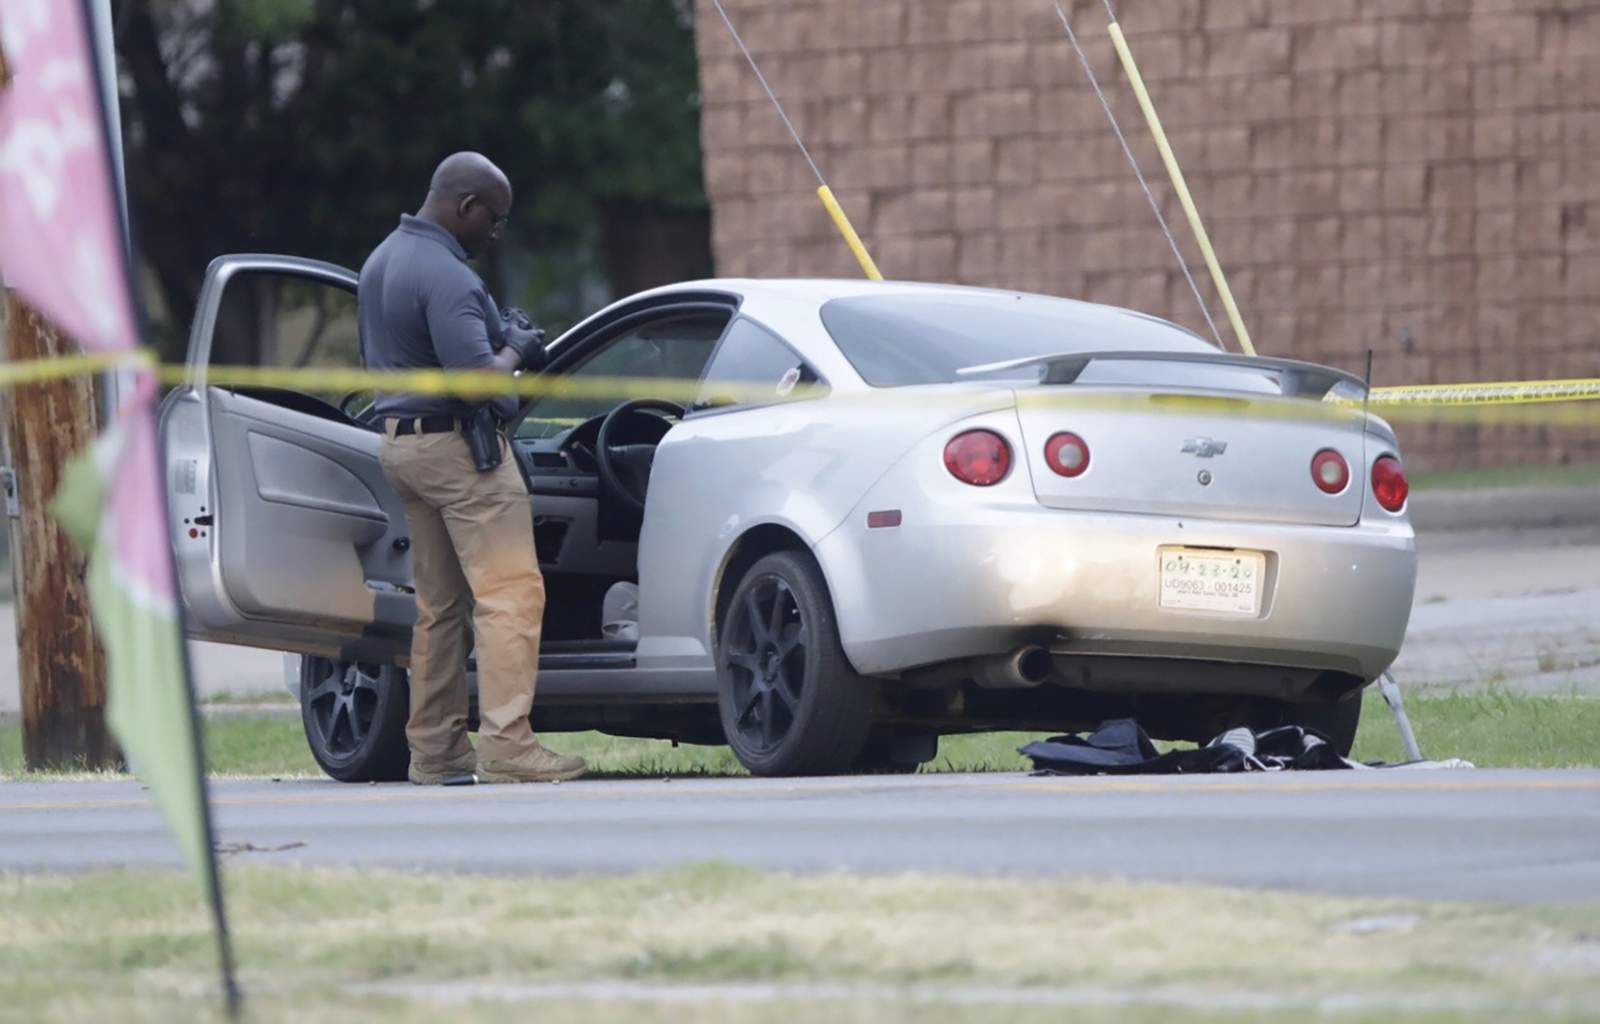 1 of 2 Oklahoma officers shot during traffic stop dies